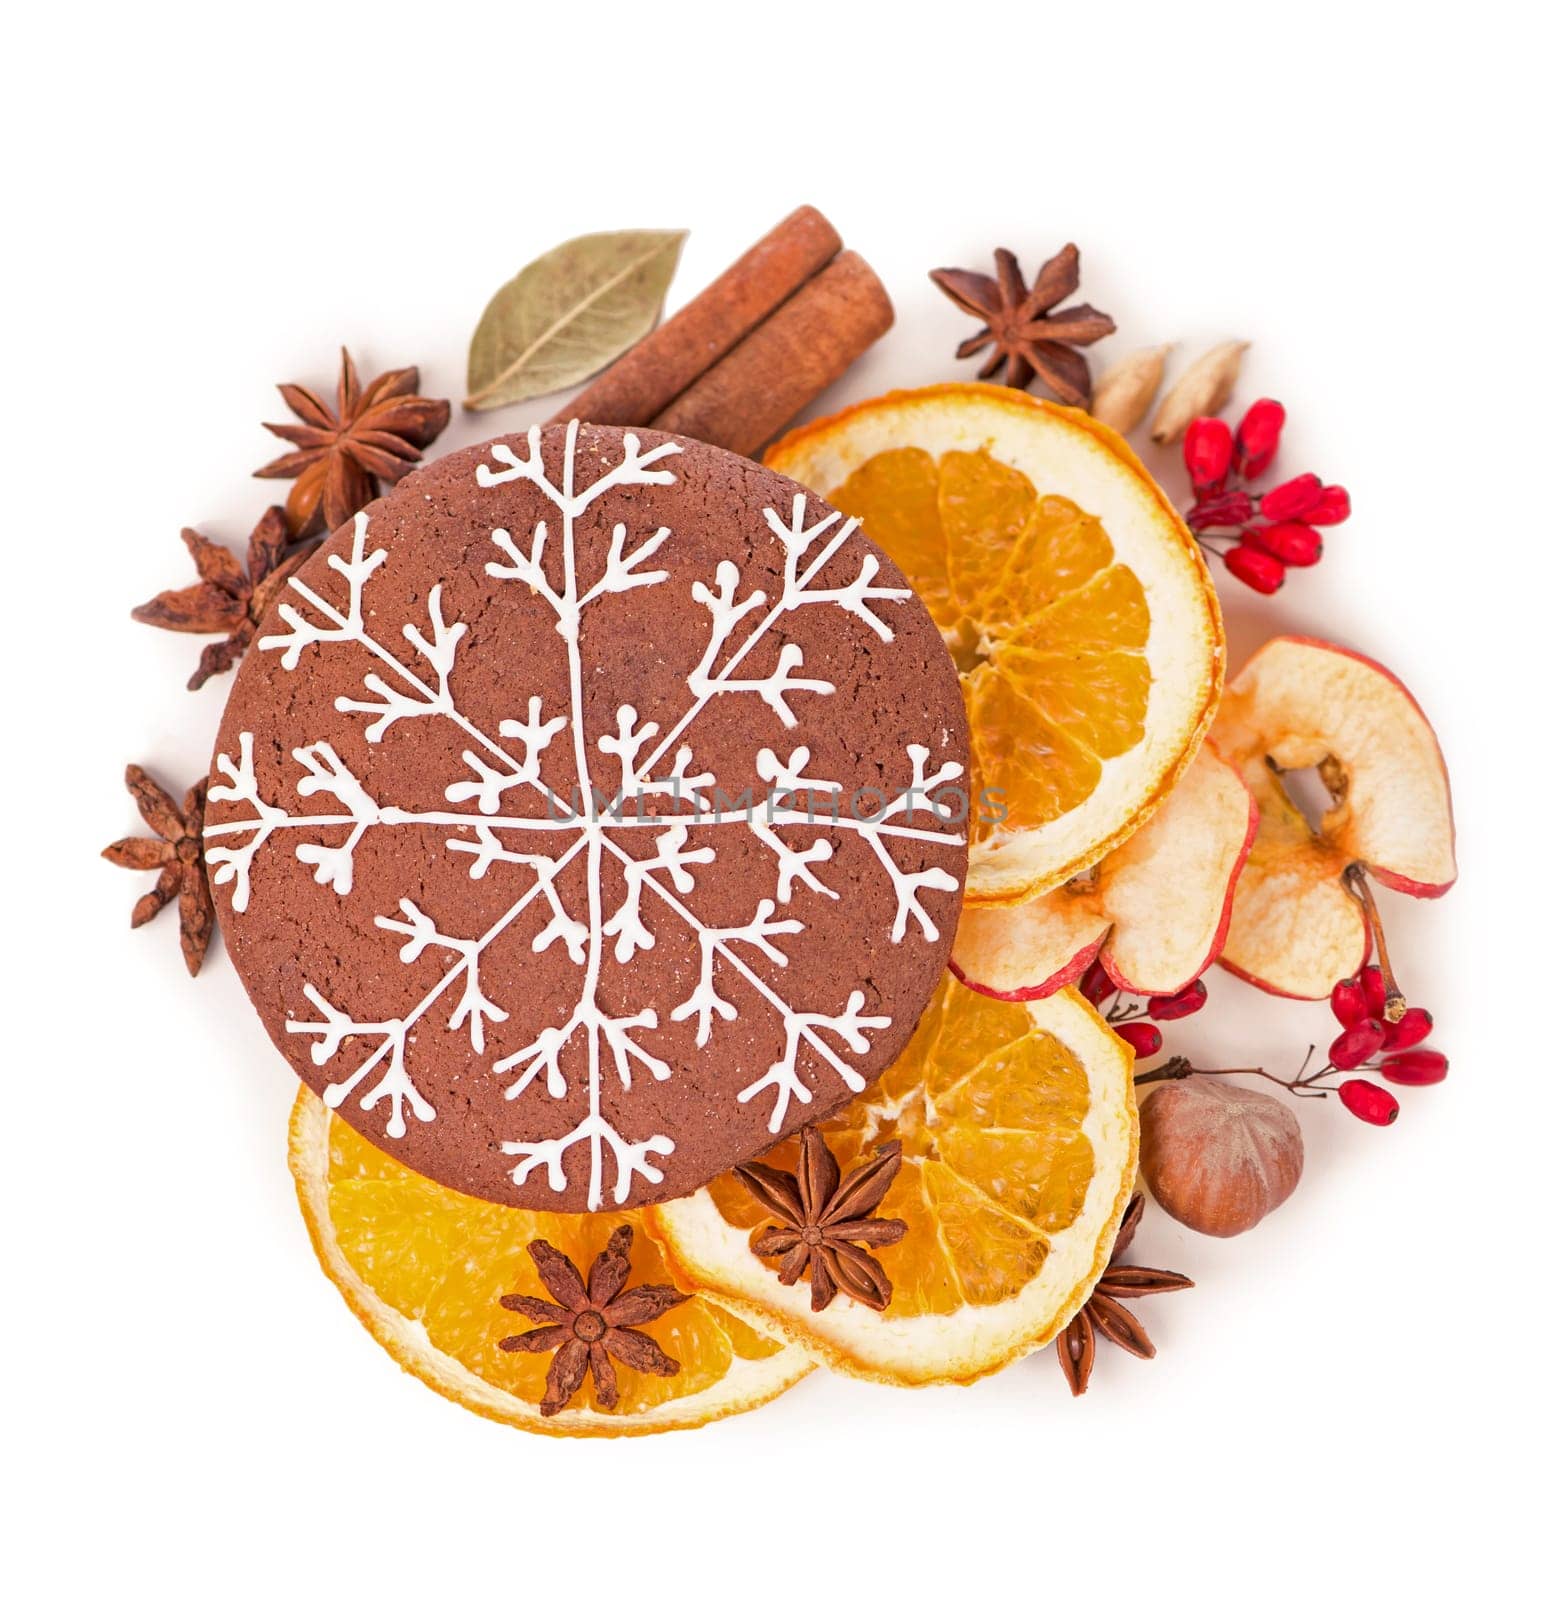 Everything for making Christmas cookies - cinnamon, barberry, anise, nuts, apples and dried orange by aprilphoto